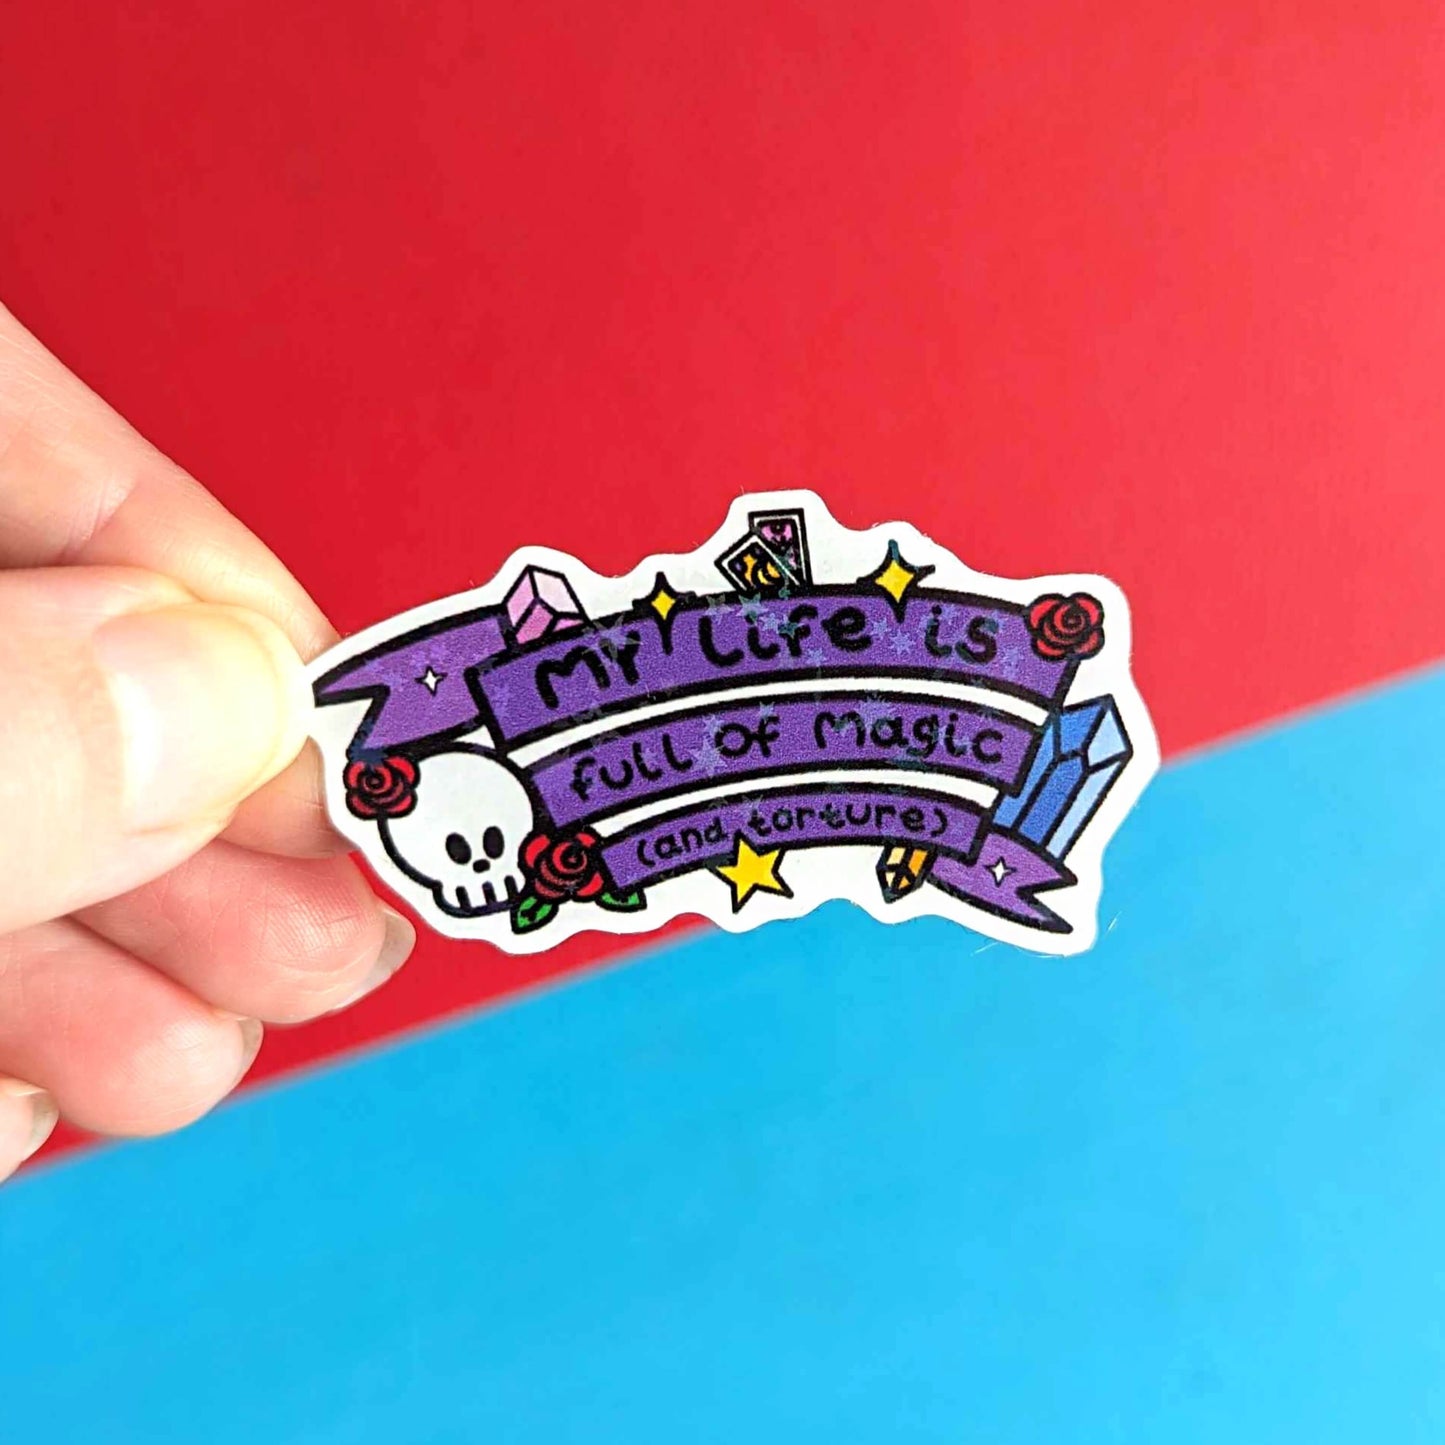 The My Life is Full of Magic & Torture Holographic Sticker held over a red and blue background. The holographic stars sticker features a purple banner sash of black text reading 'my life is full of magic (and torture)' with yellow sparkles, crystals, red roses, tarot cards and a skull head.